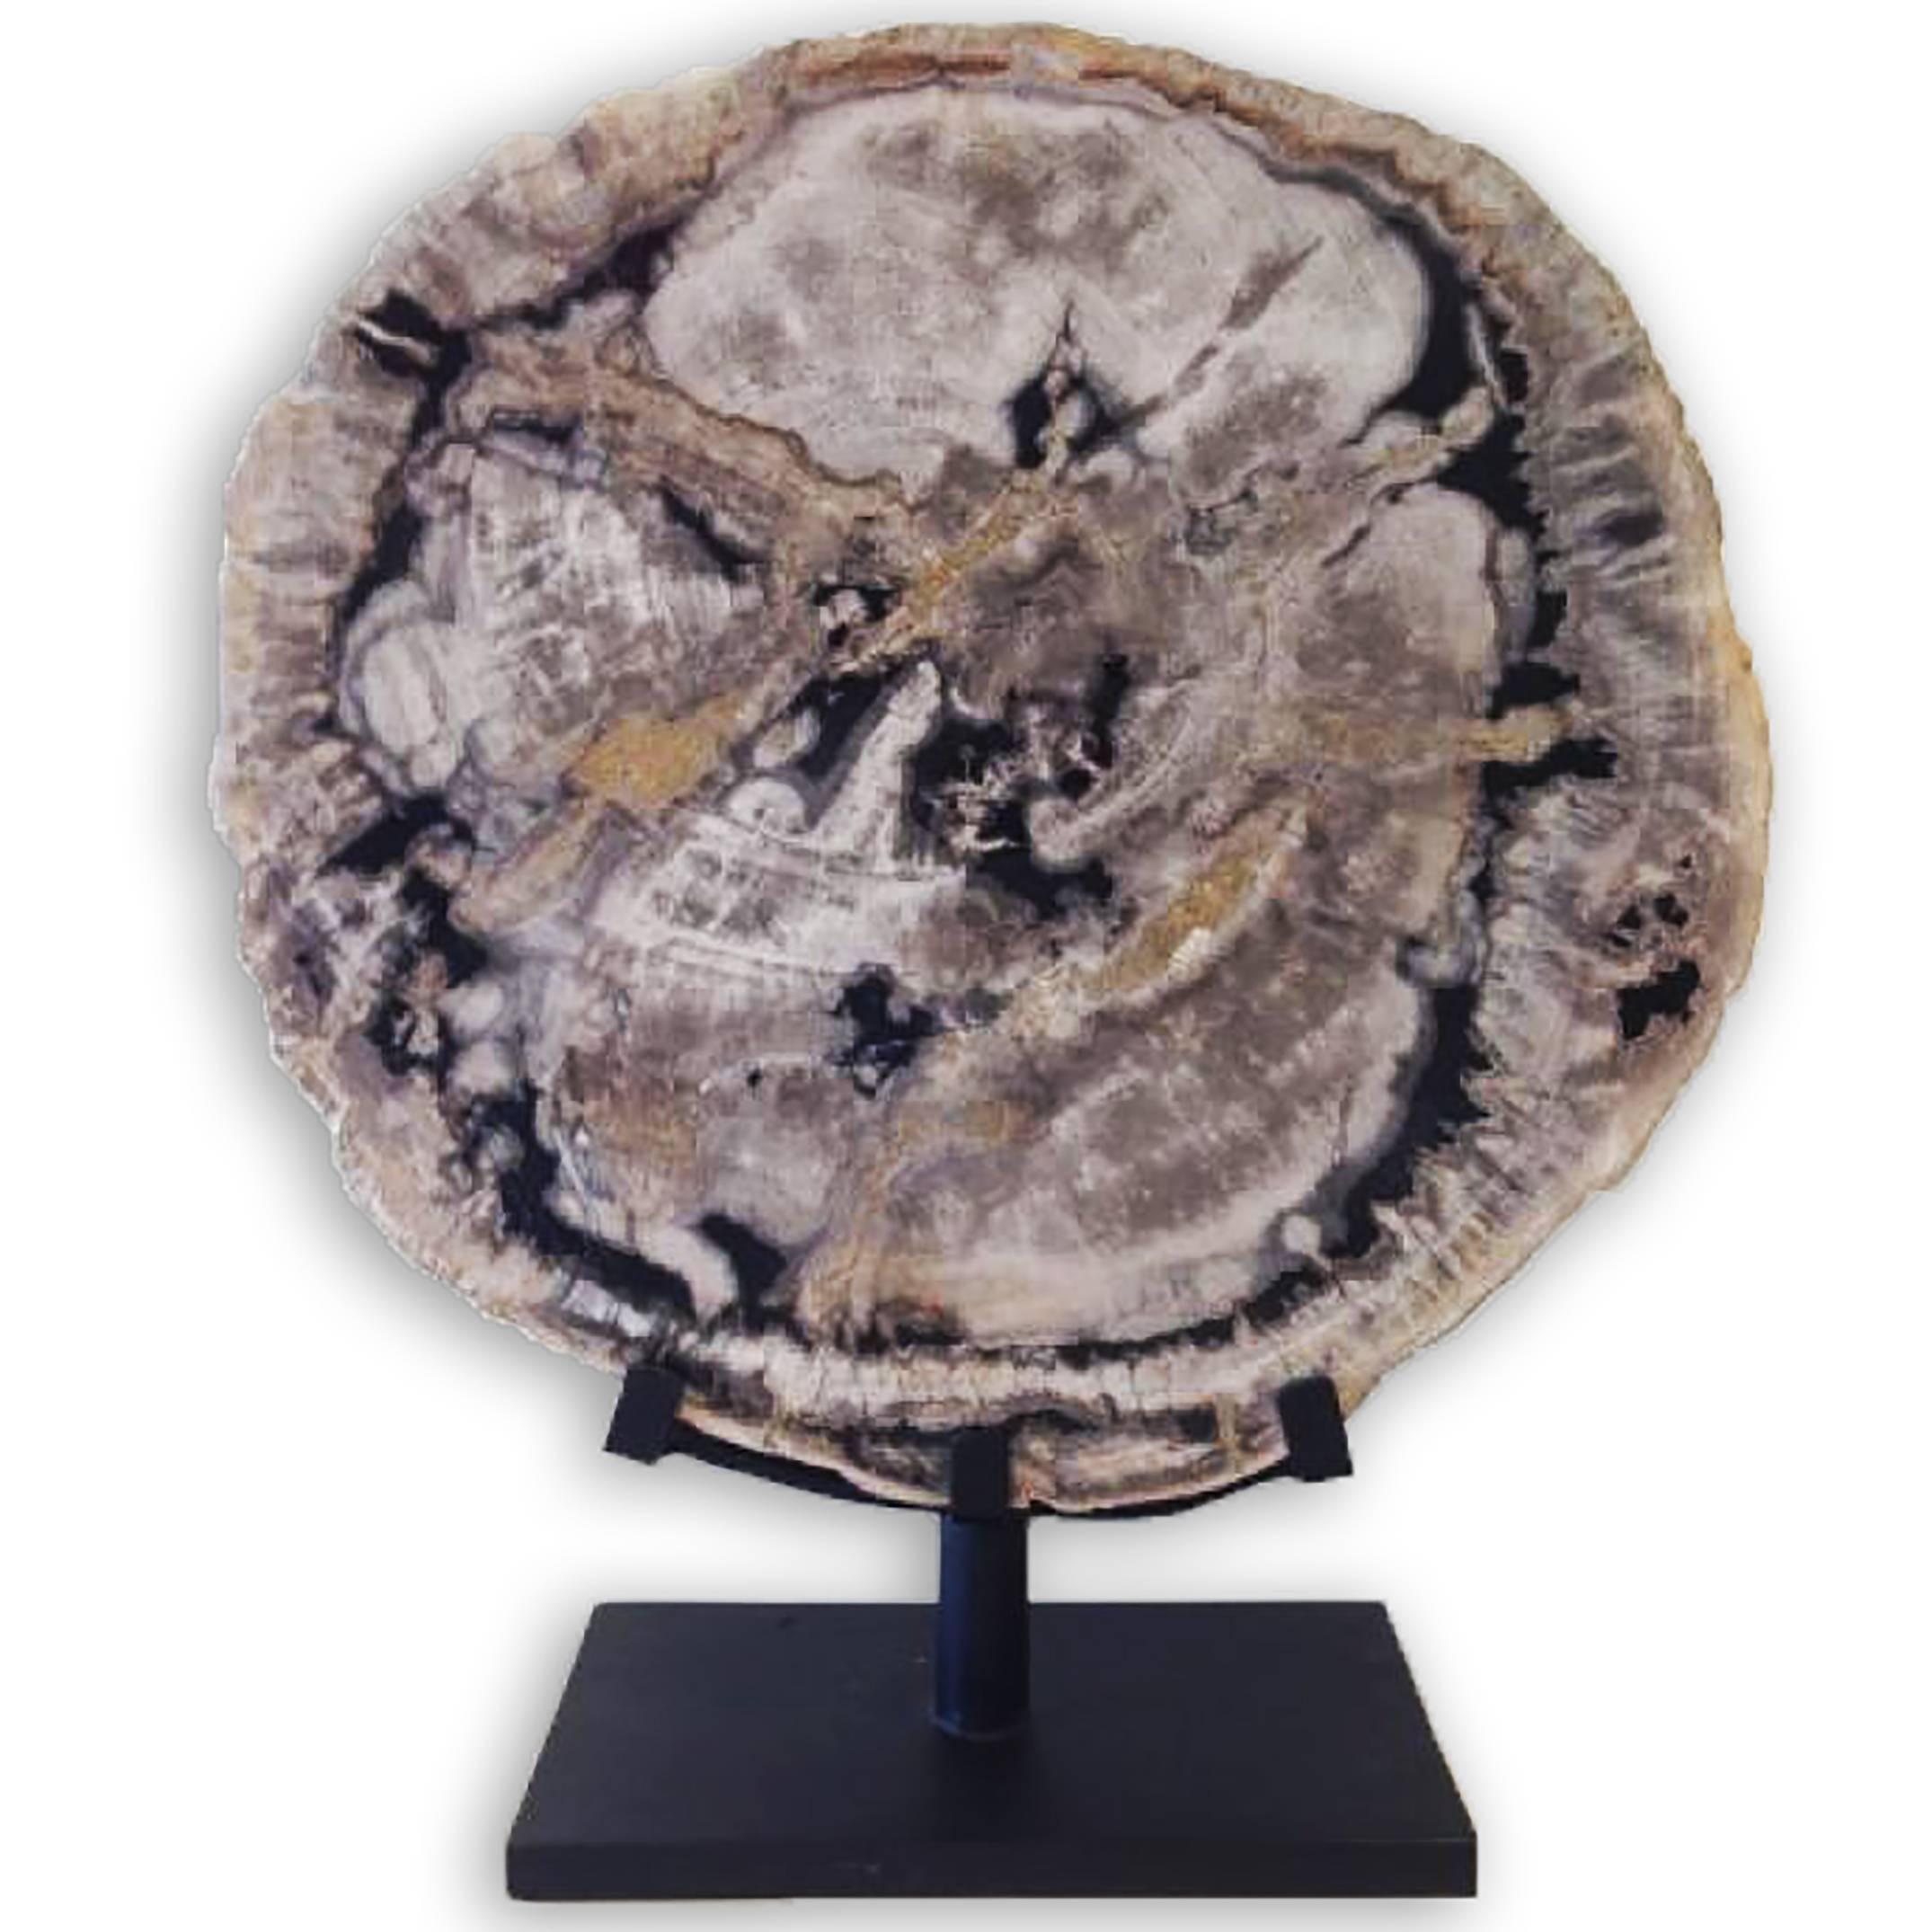 PETRIFIED WOOD ON STAND - Art by Unknown